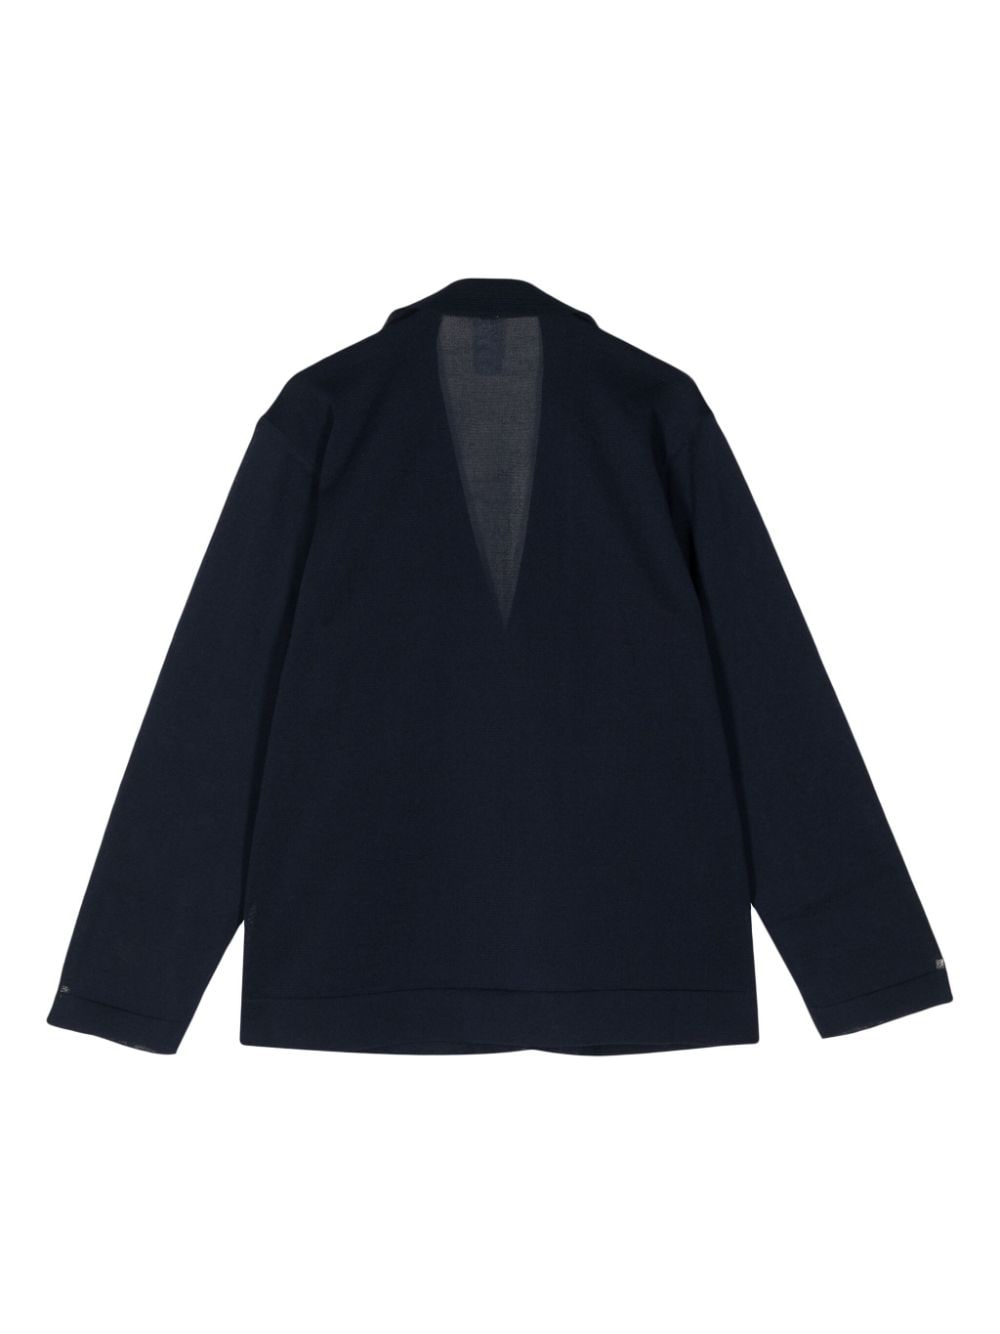 CFCL piqué single-breasted jacket - Blauw